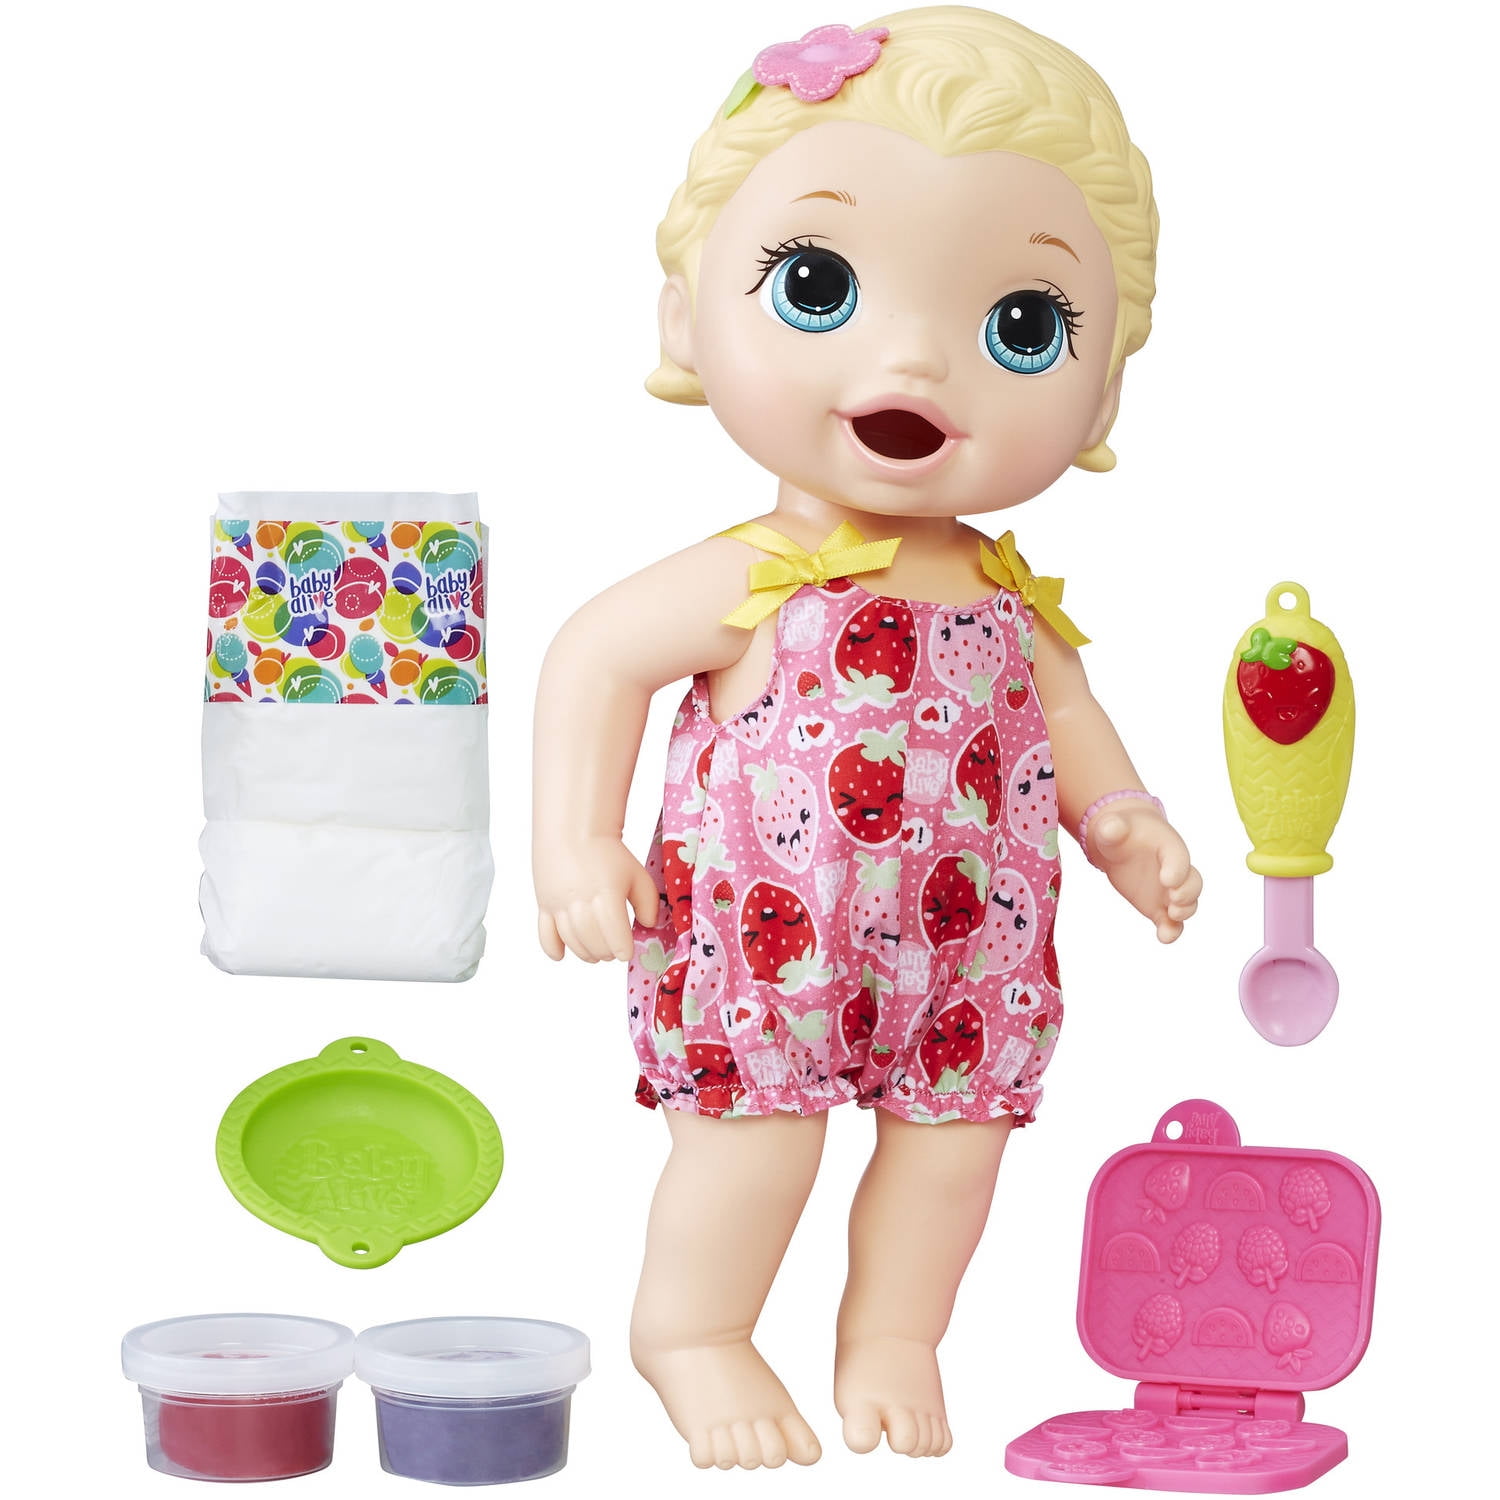 Toys Dolls Girls Kids Collectible Gift Play Pretend Blonde NEW Baby Go Bye Bye 